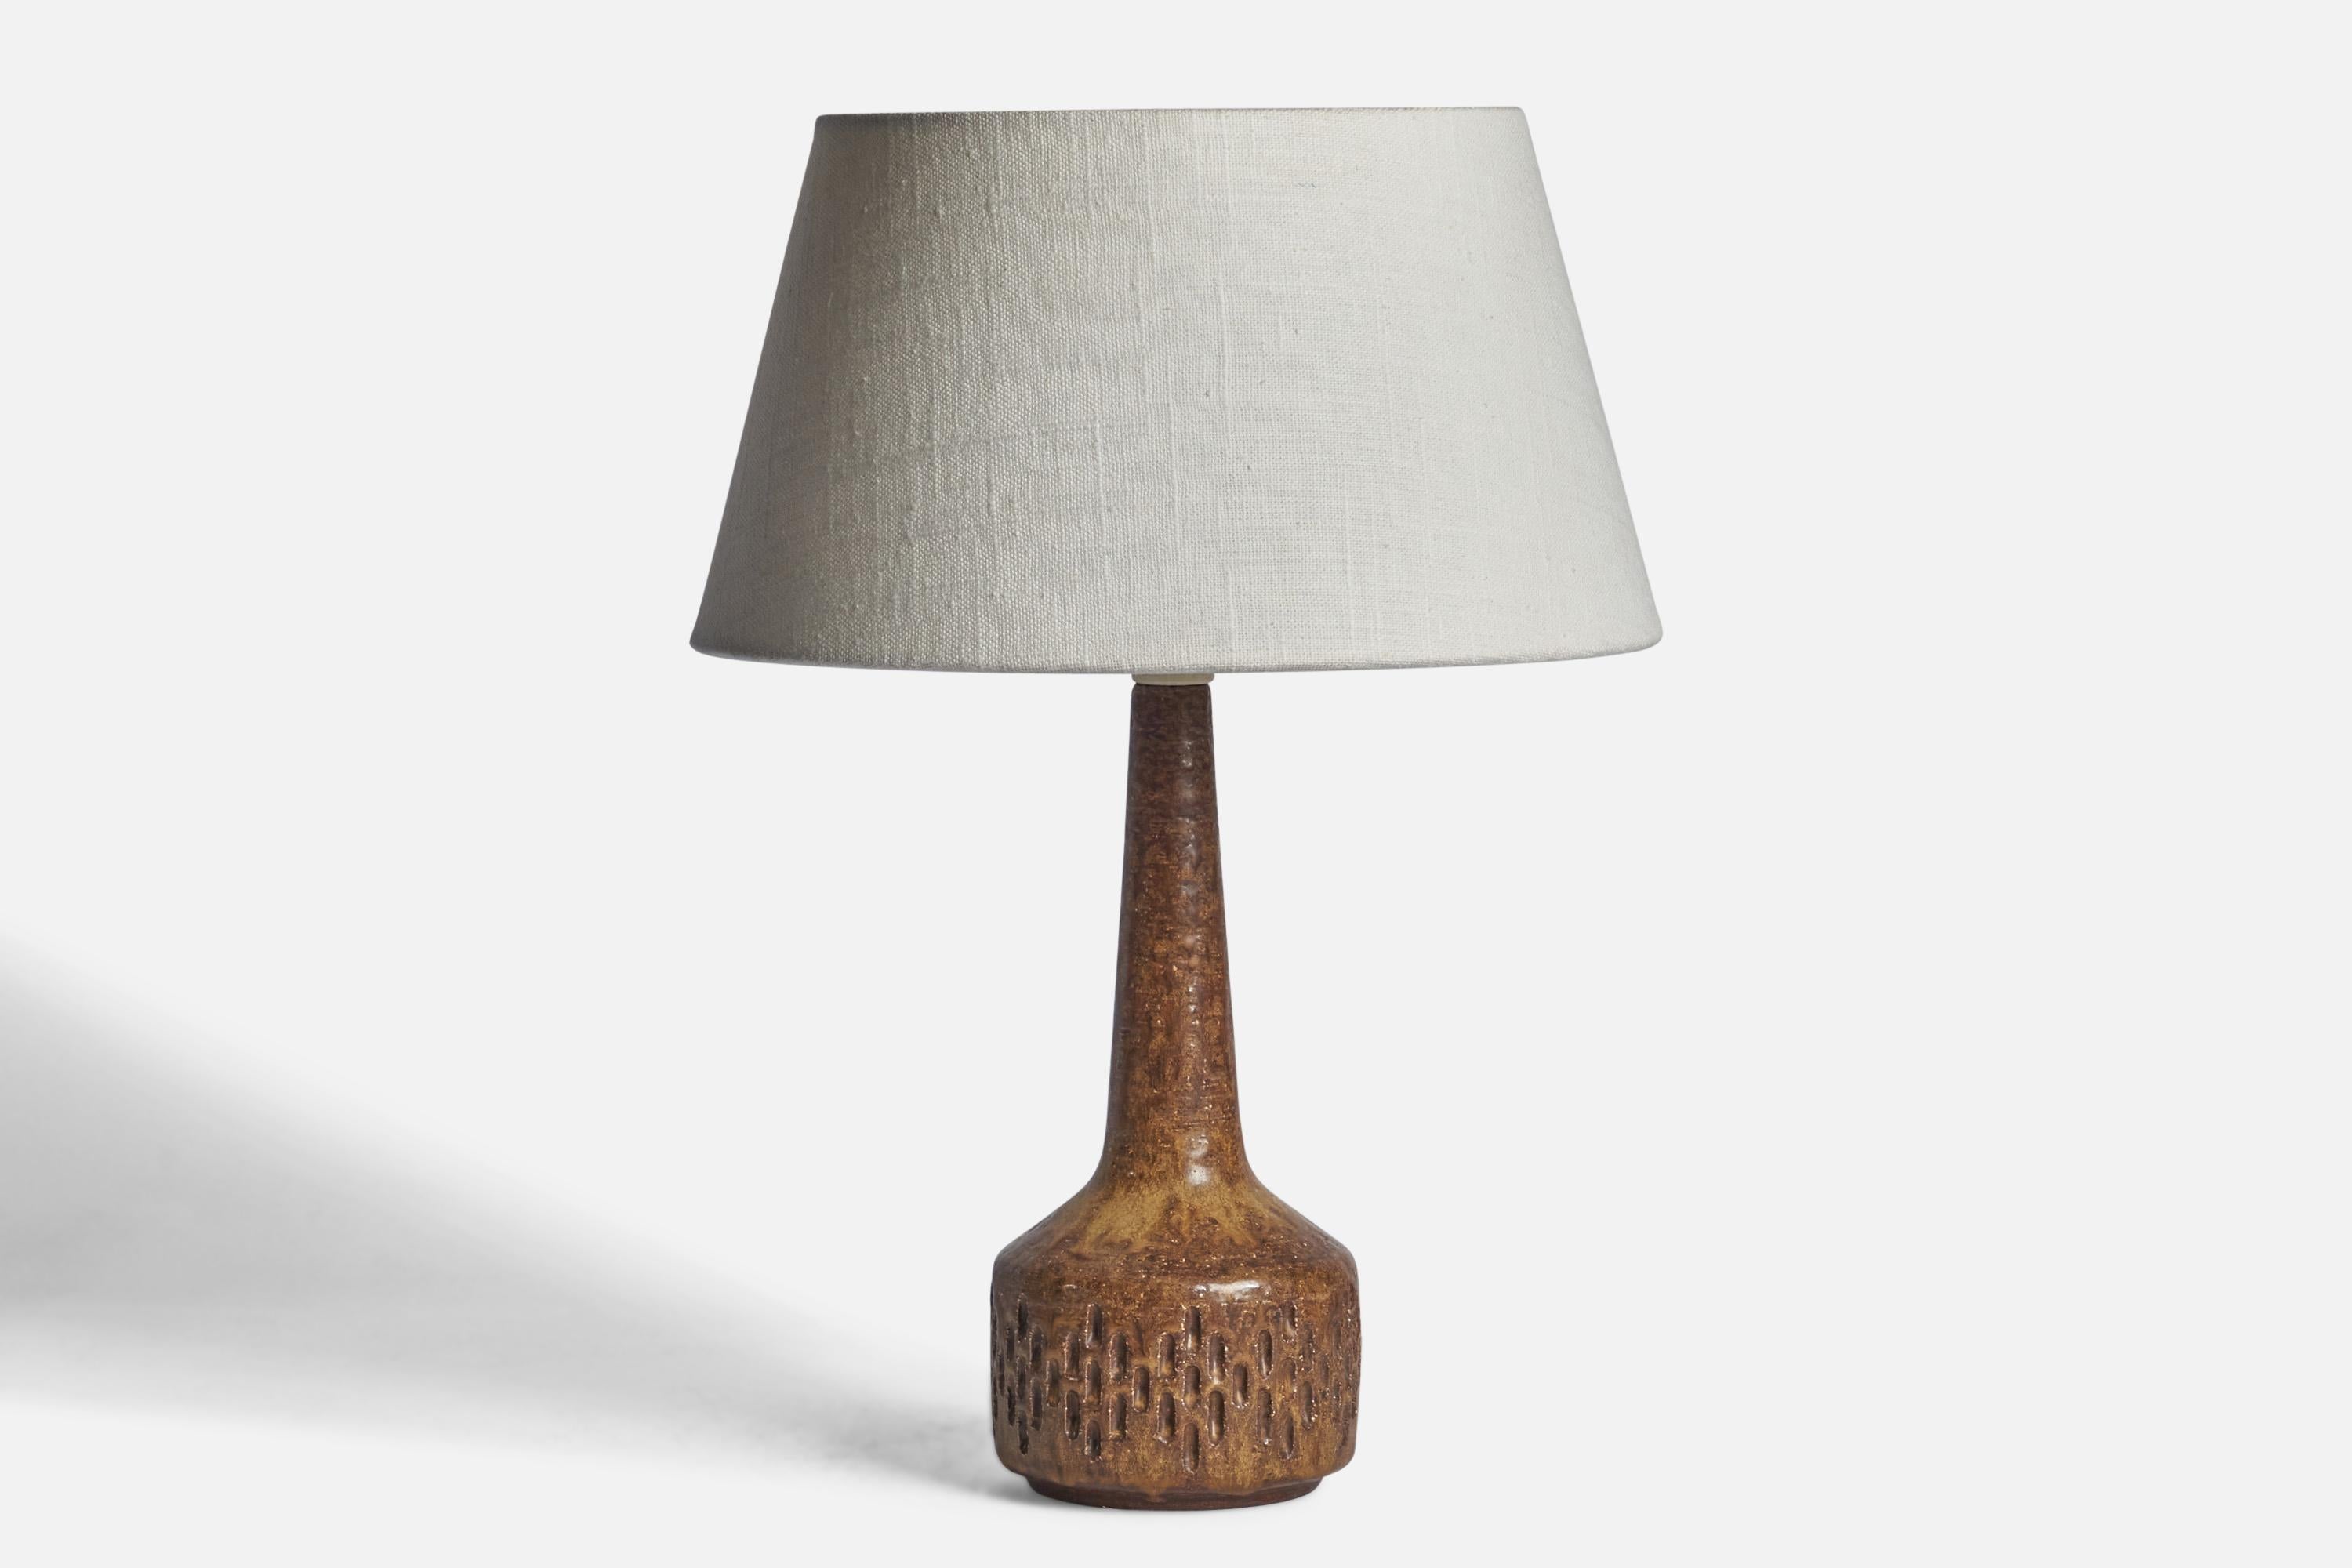 A brown-glazed stoneware table lamp designed by Per & Annelise Linneman-Schmidt and produced by Palshus, Denmark, 1960s

Dimensions of Lamp (inches): 11” H x 3.85” Diameter
Dimensions of Shade (inches): 7” Top Diameter x 10” Bottom Diameter x